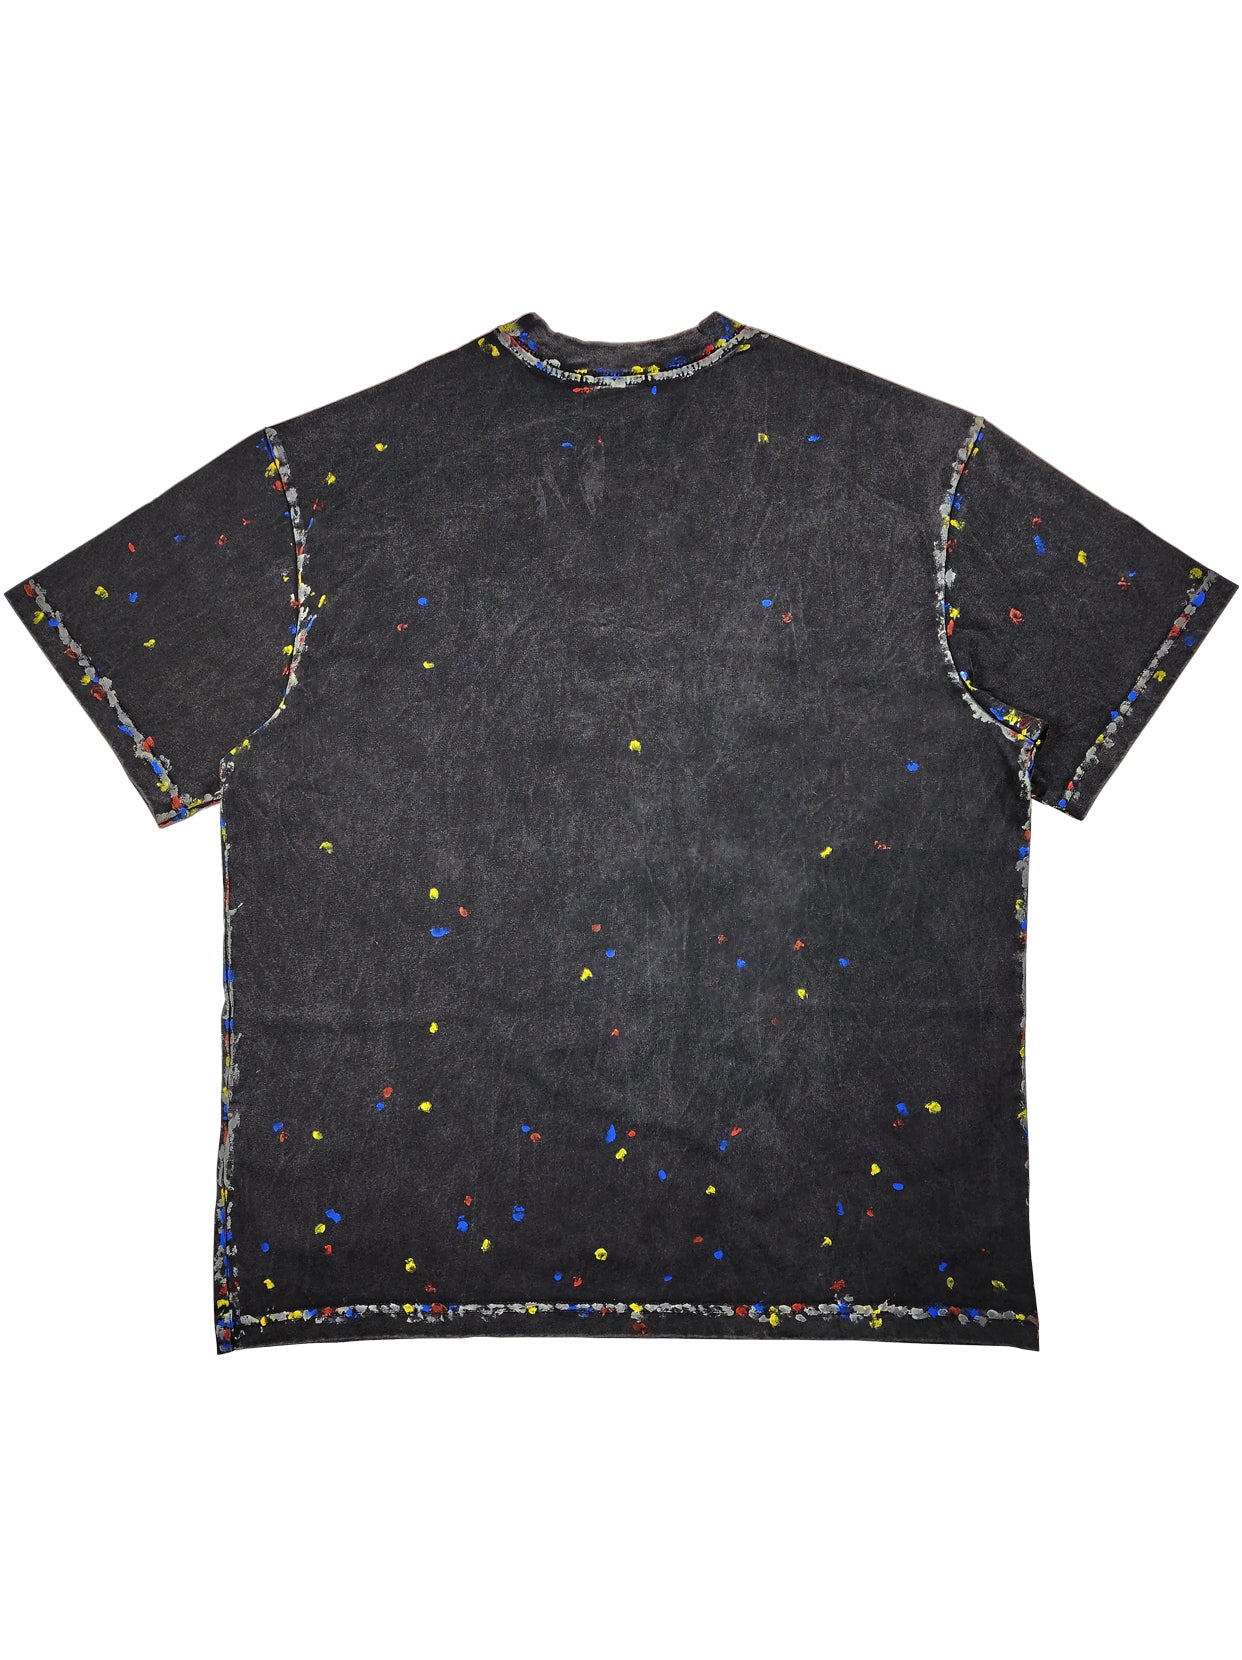 Leather Label Black Distressed "NIGHT GLO" T-Shirt